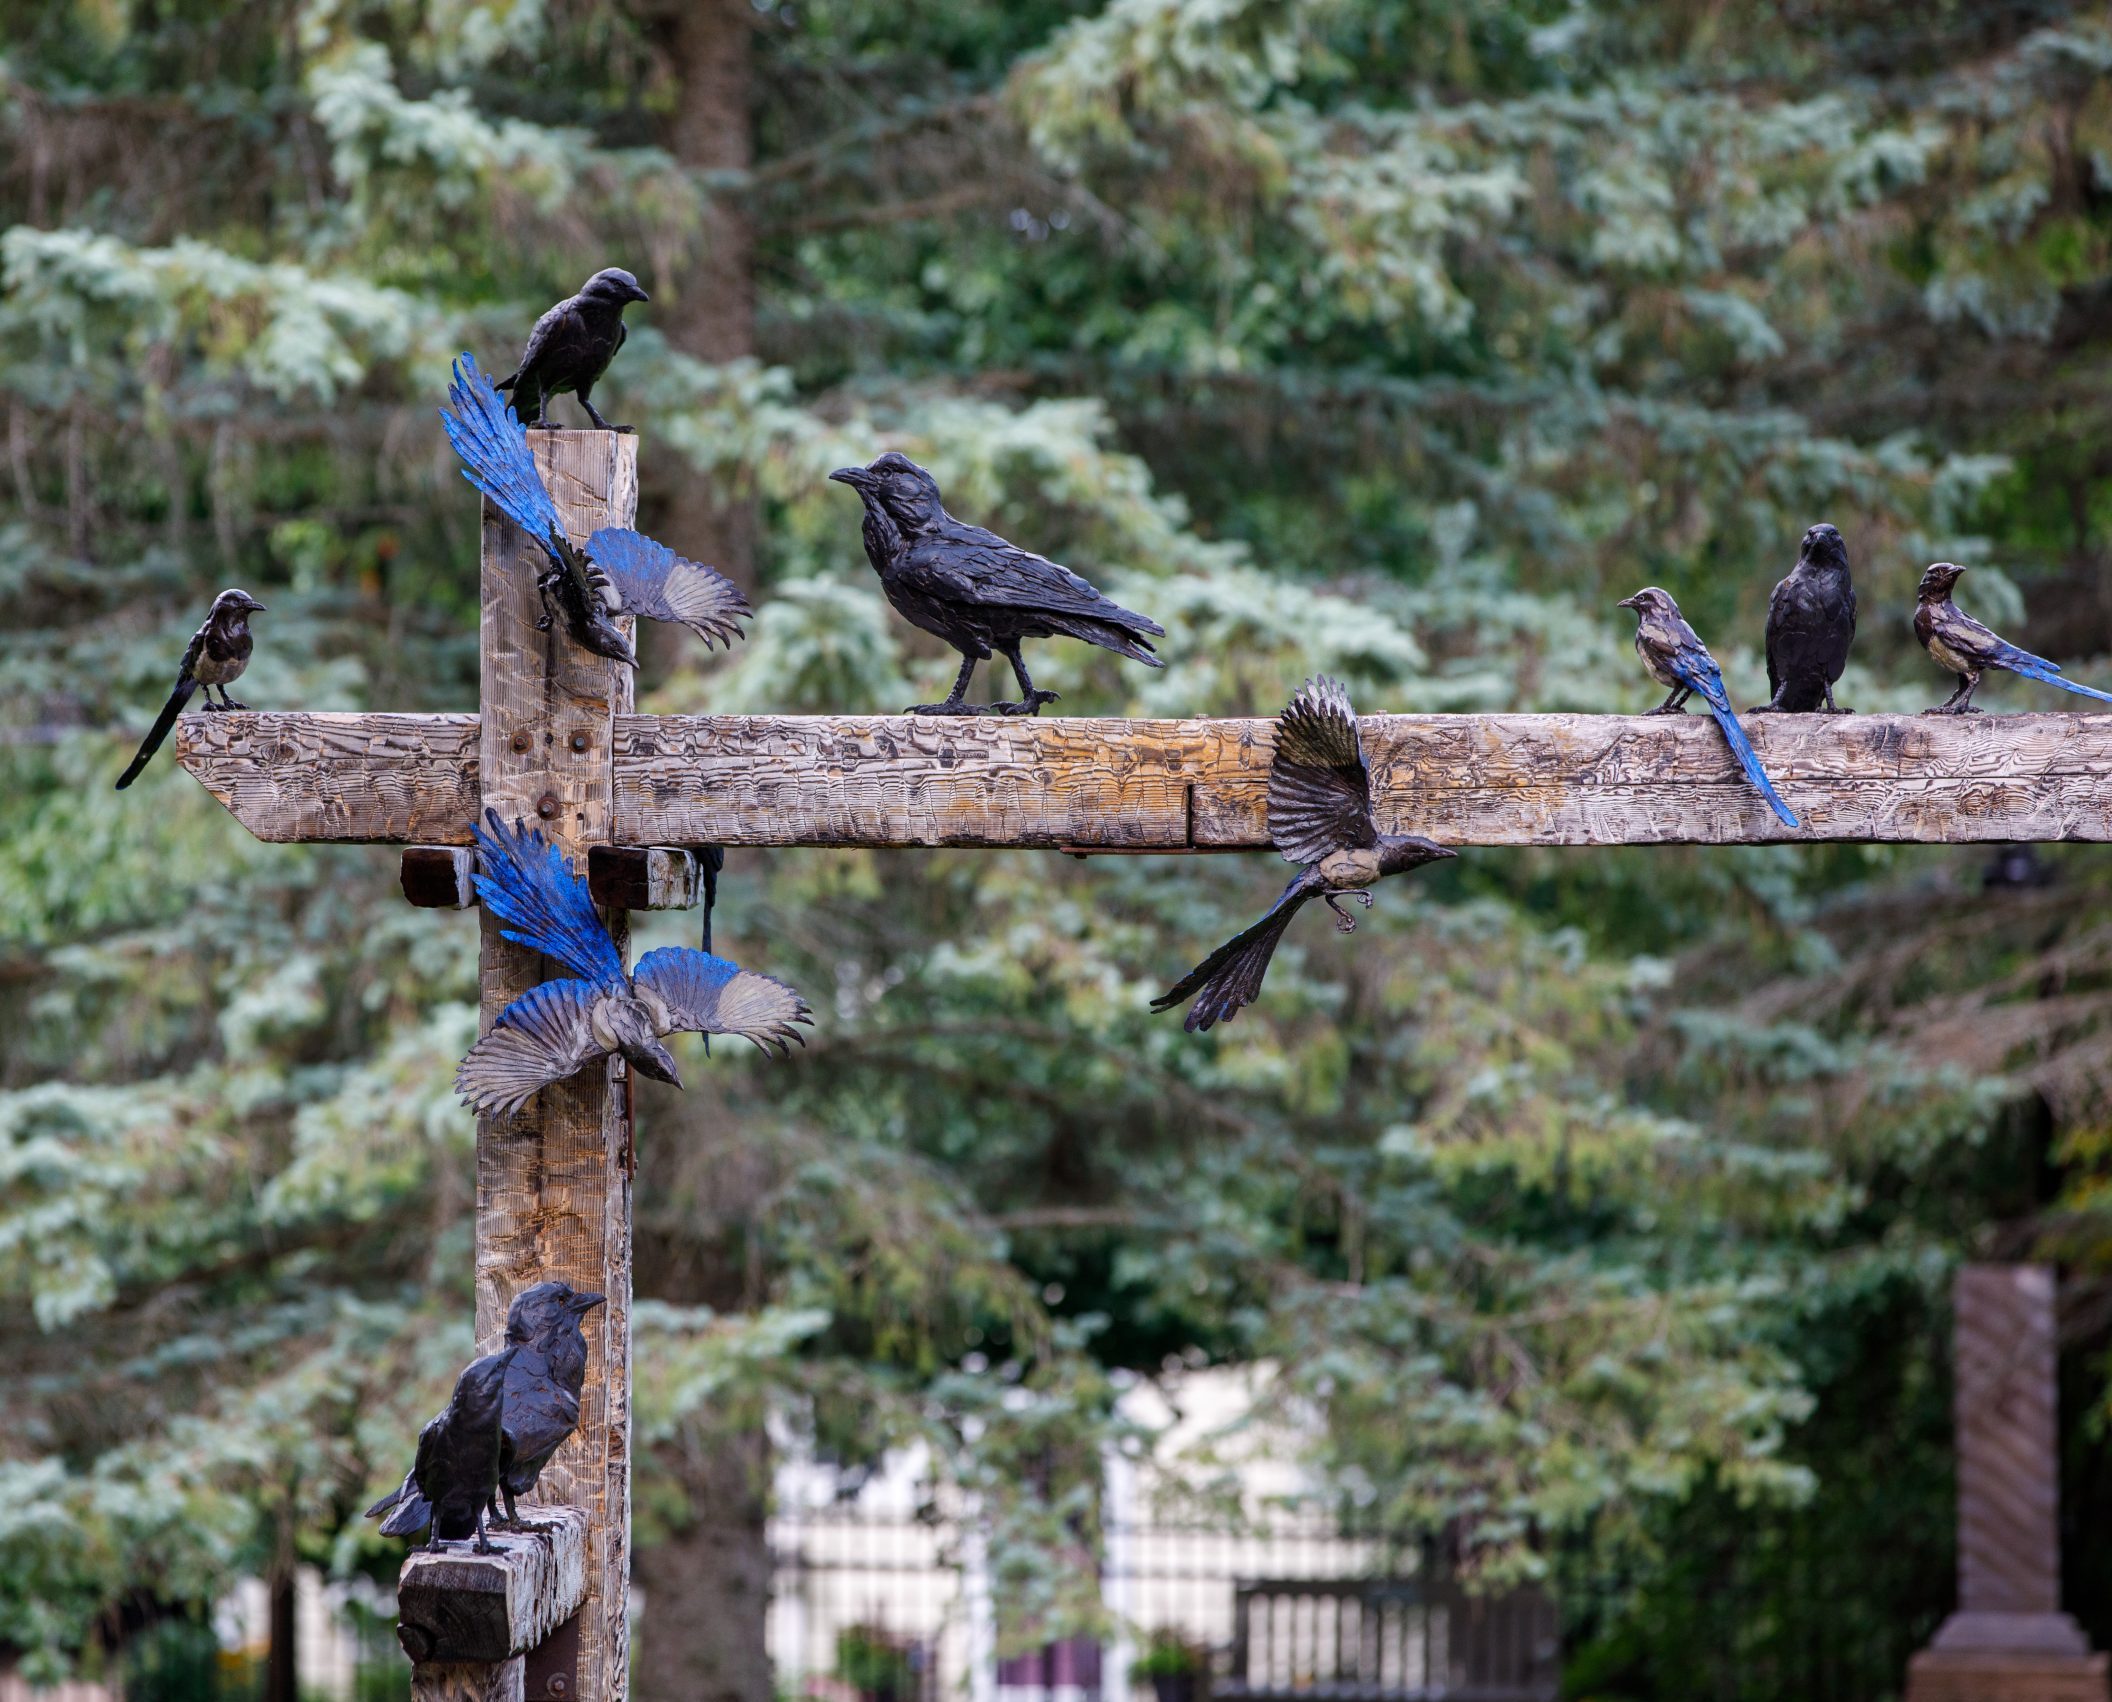 This image depicts a bronze and wood sculpture by artist Paul rhymer of a group of 19 crows, ravens, jays, and magpies interacting on wooden posts and beams